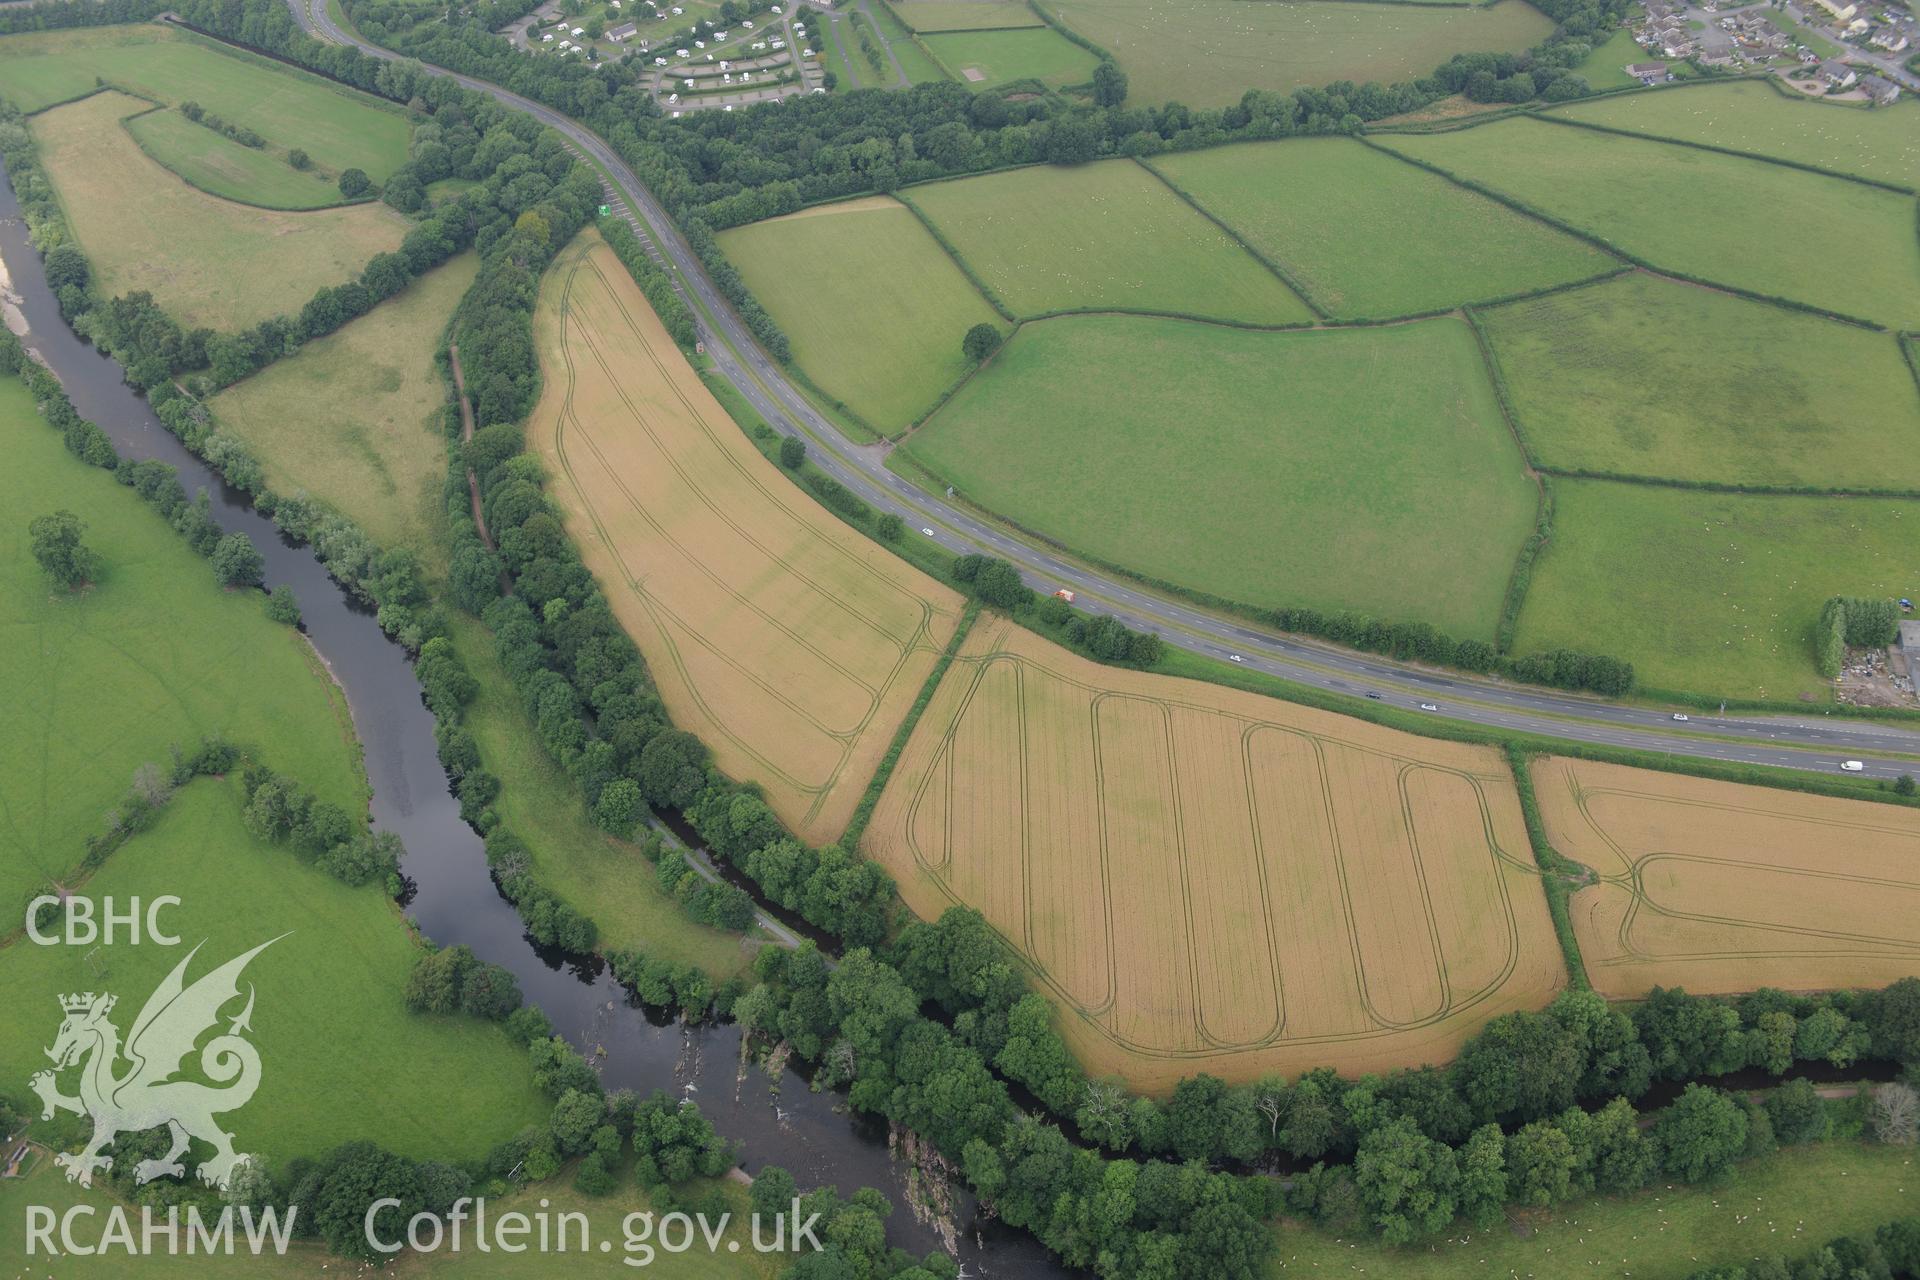 Cefn-brynich Roman fort, general view of cropmarks from south-east, taken by RCAHMW 1st August 2013.